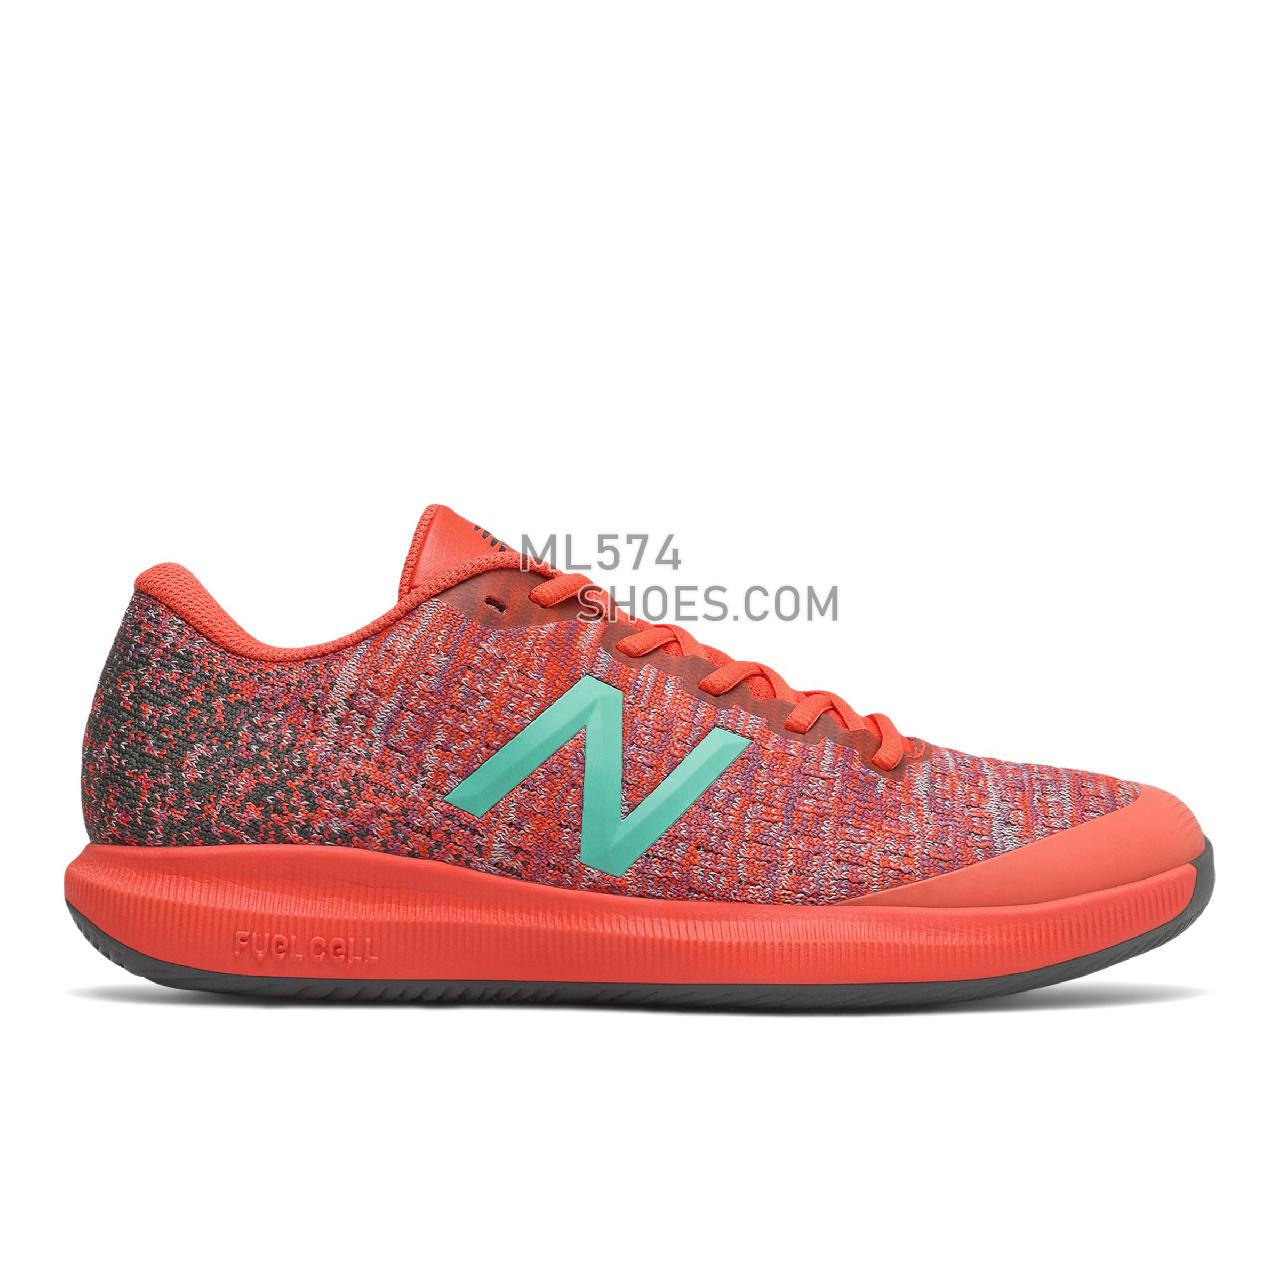 New Balance FUELCELL 996v4 - Men's Classic Sneakers - Ghost Pepper with Phantom - MCH996P4